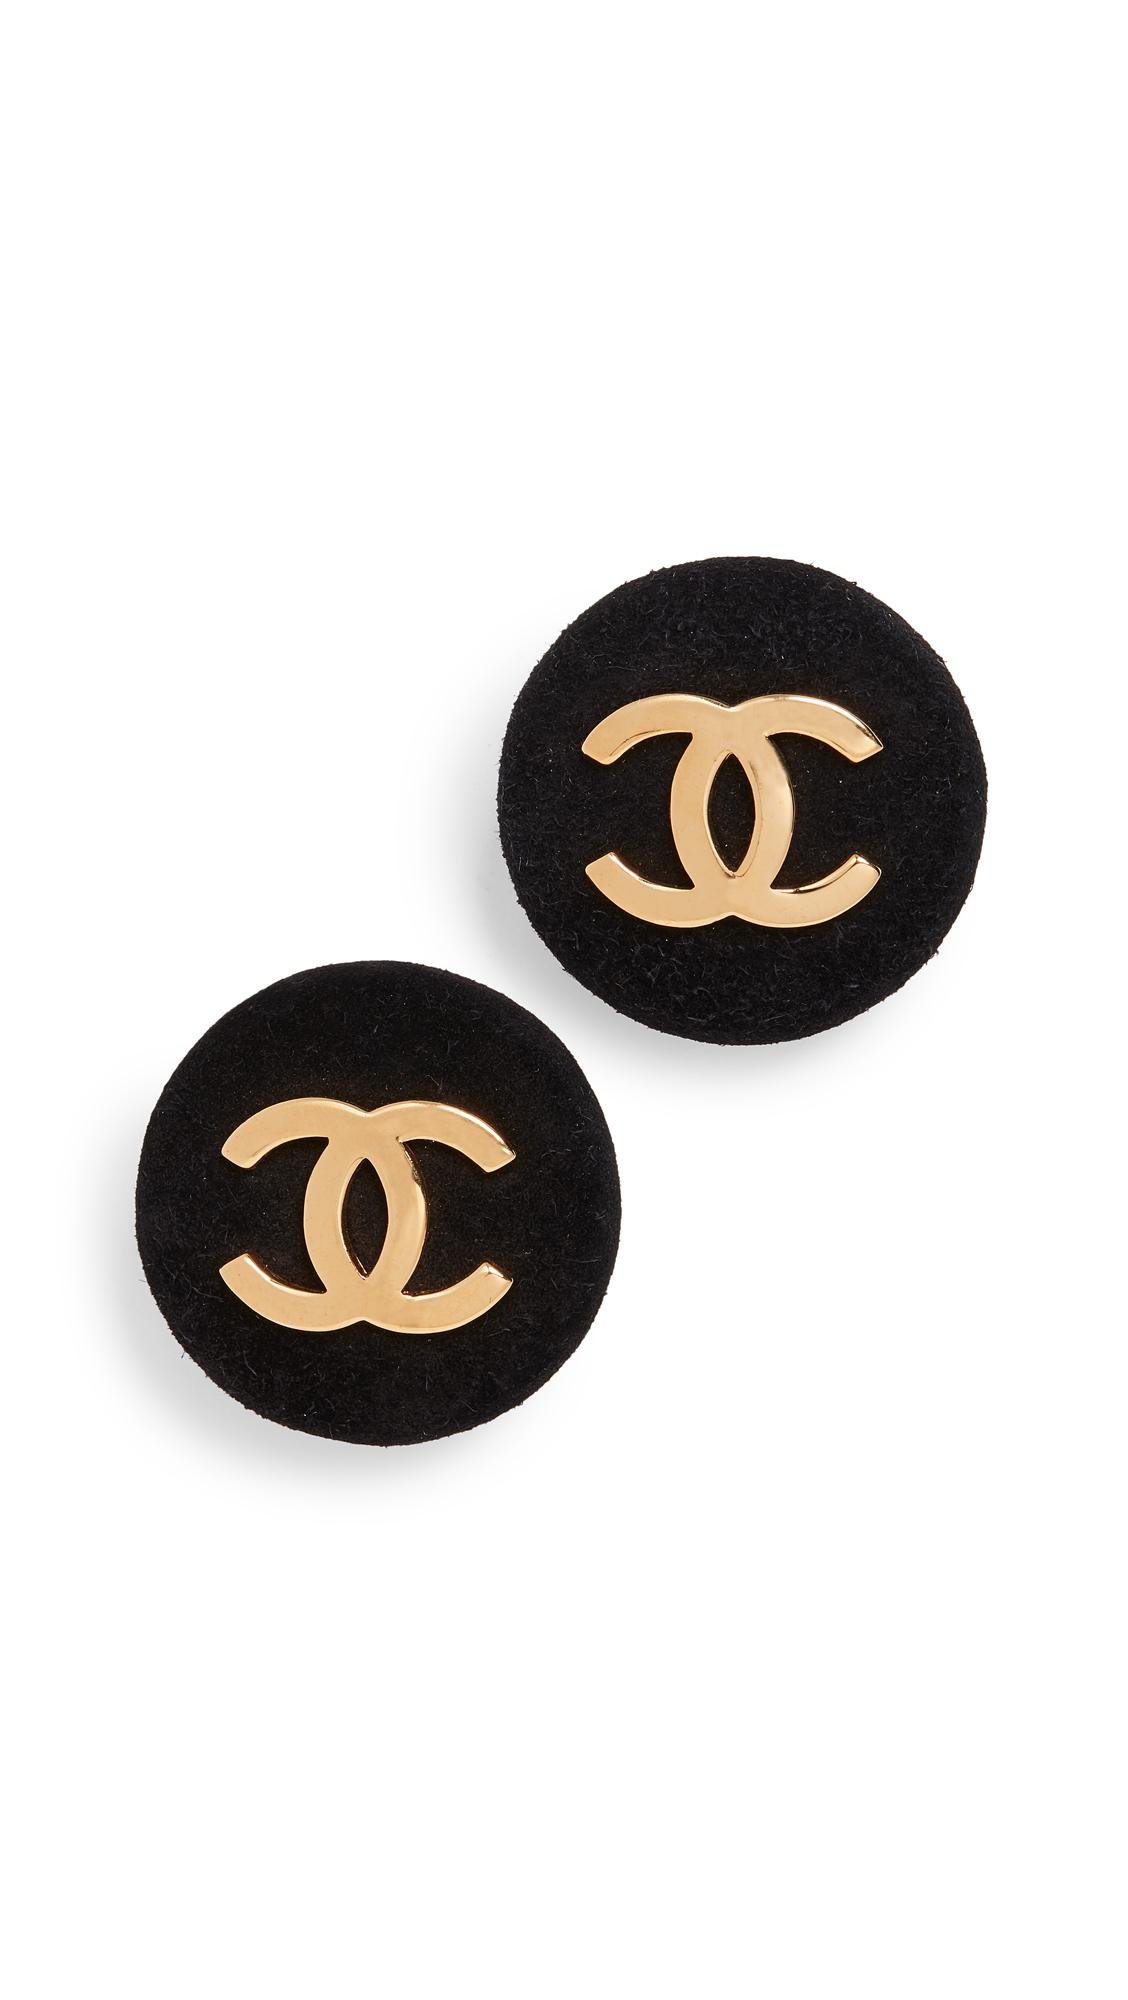 NEW EARRINGS CHANEL LOGO CC PANTHERE IN GOLD METAL NEW EARRINGS